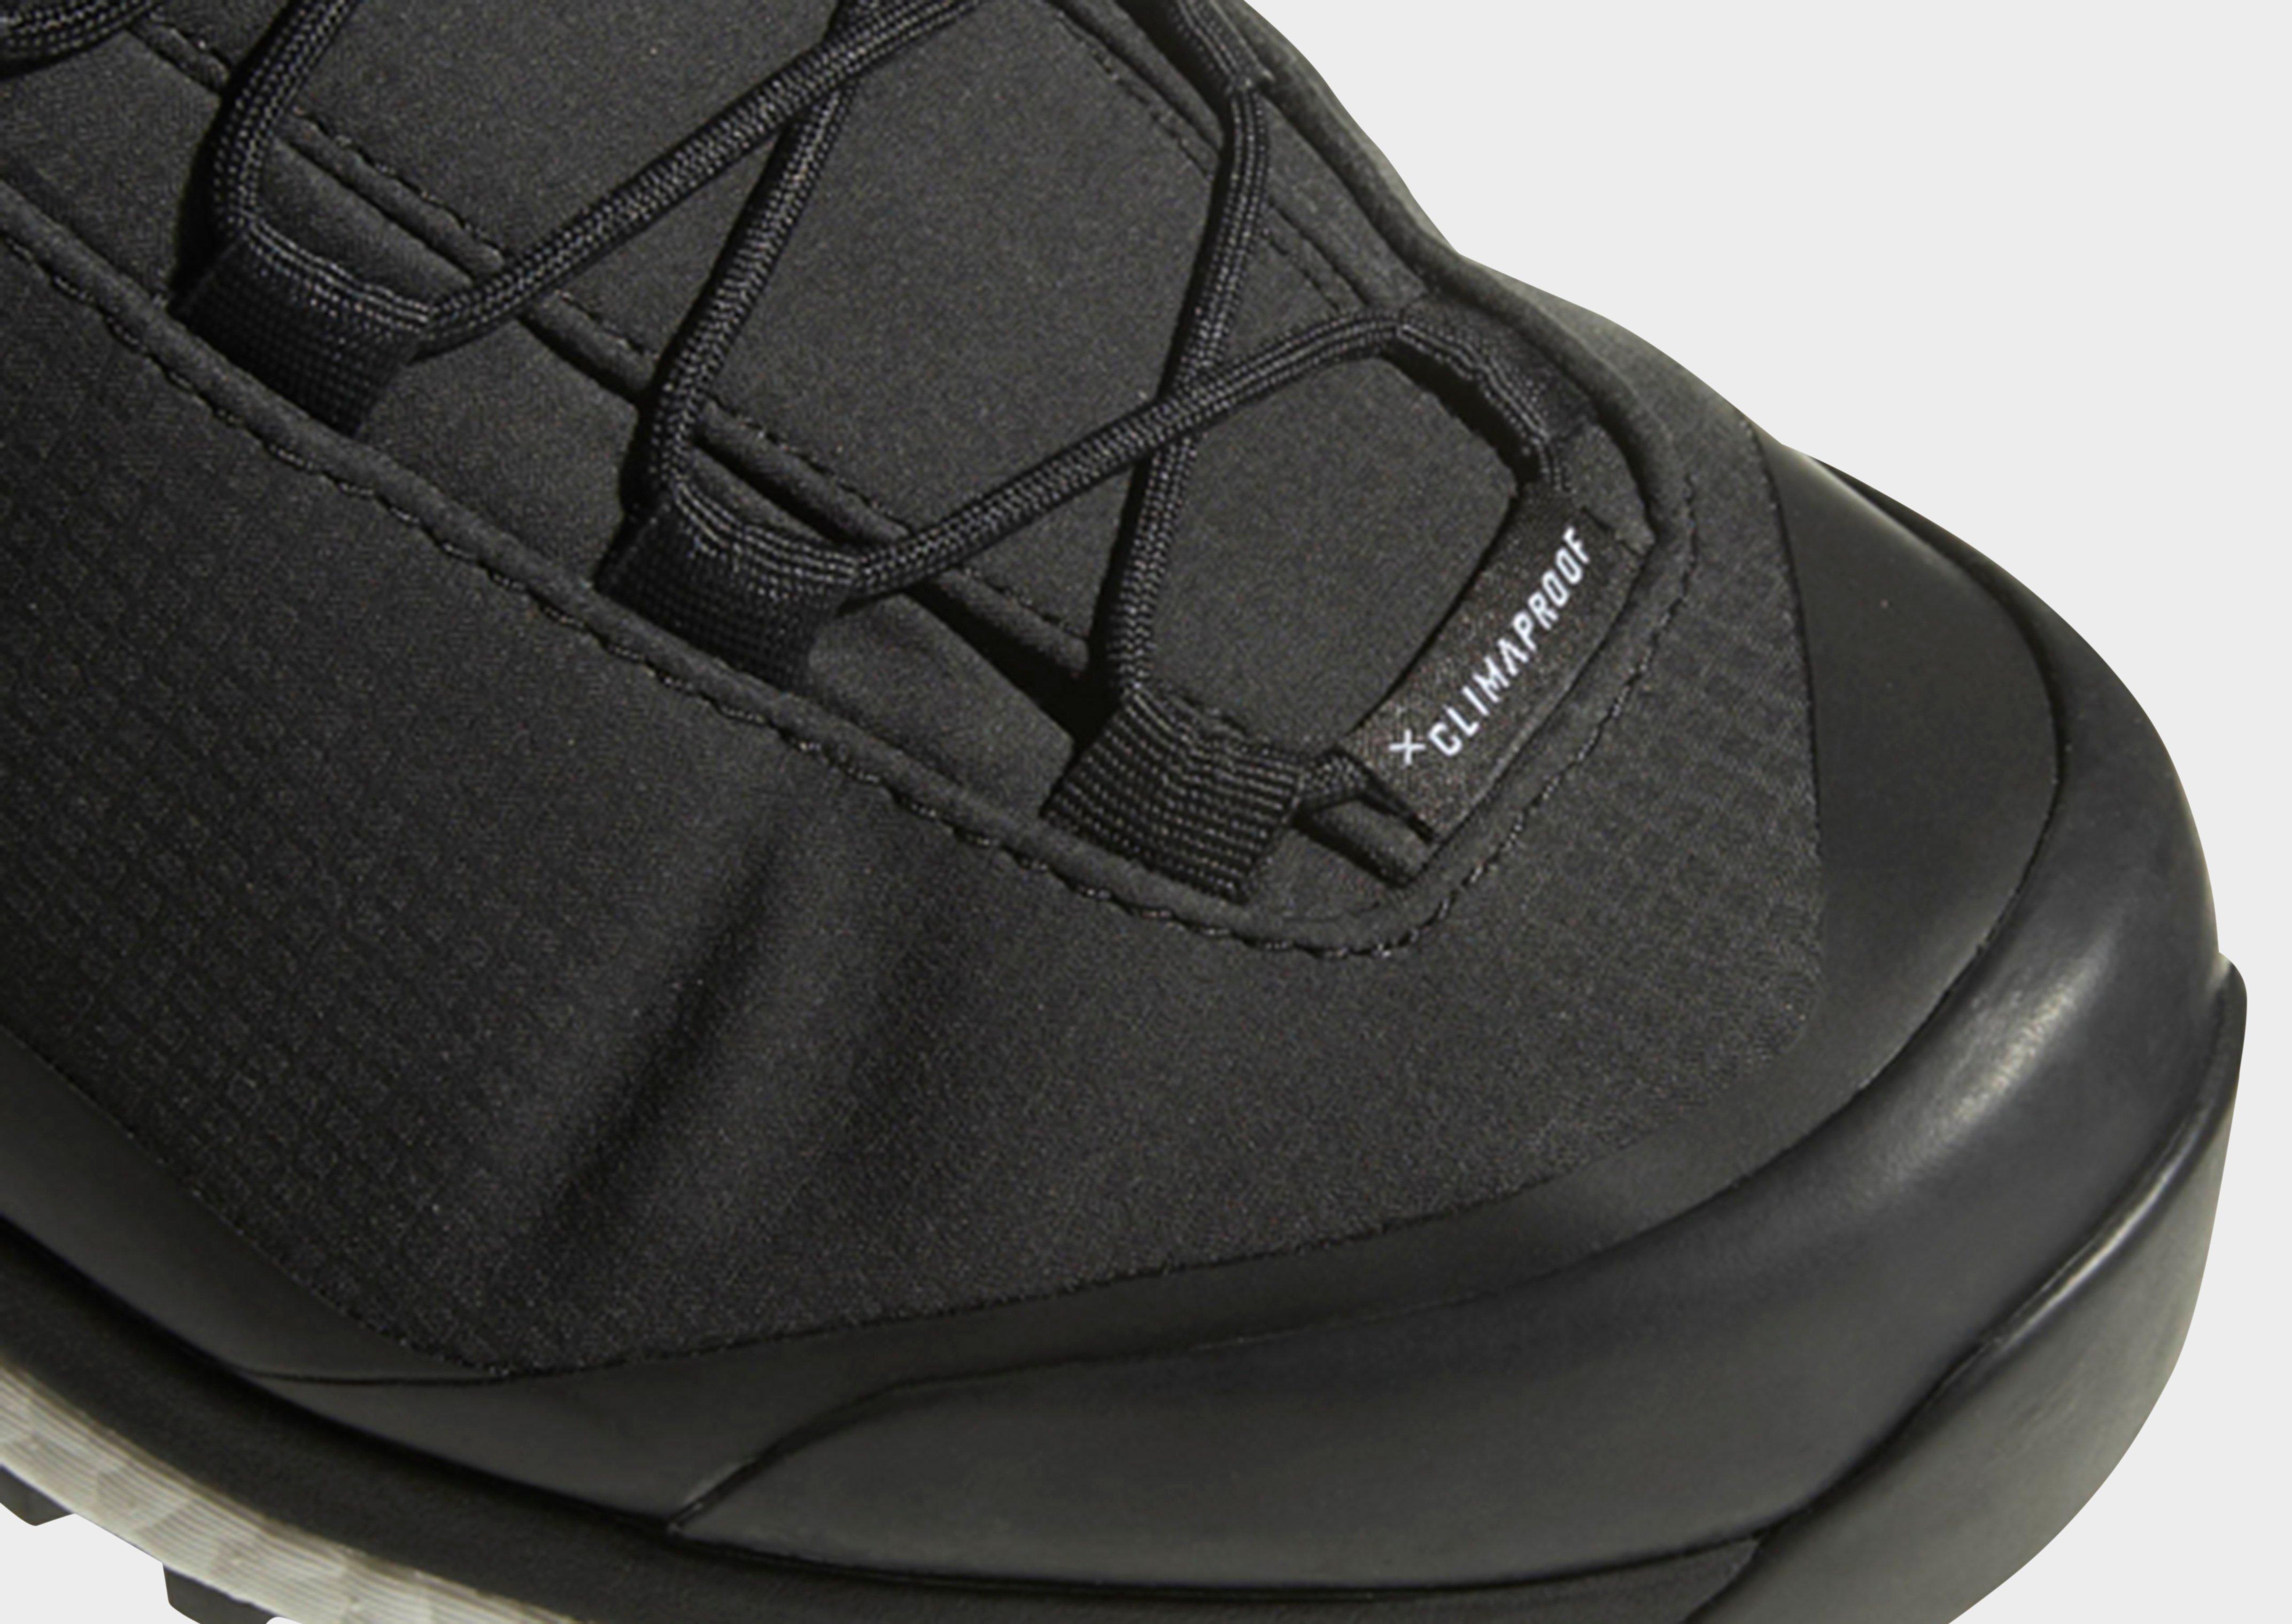 terrex tracefinder climaheat boots